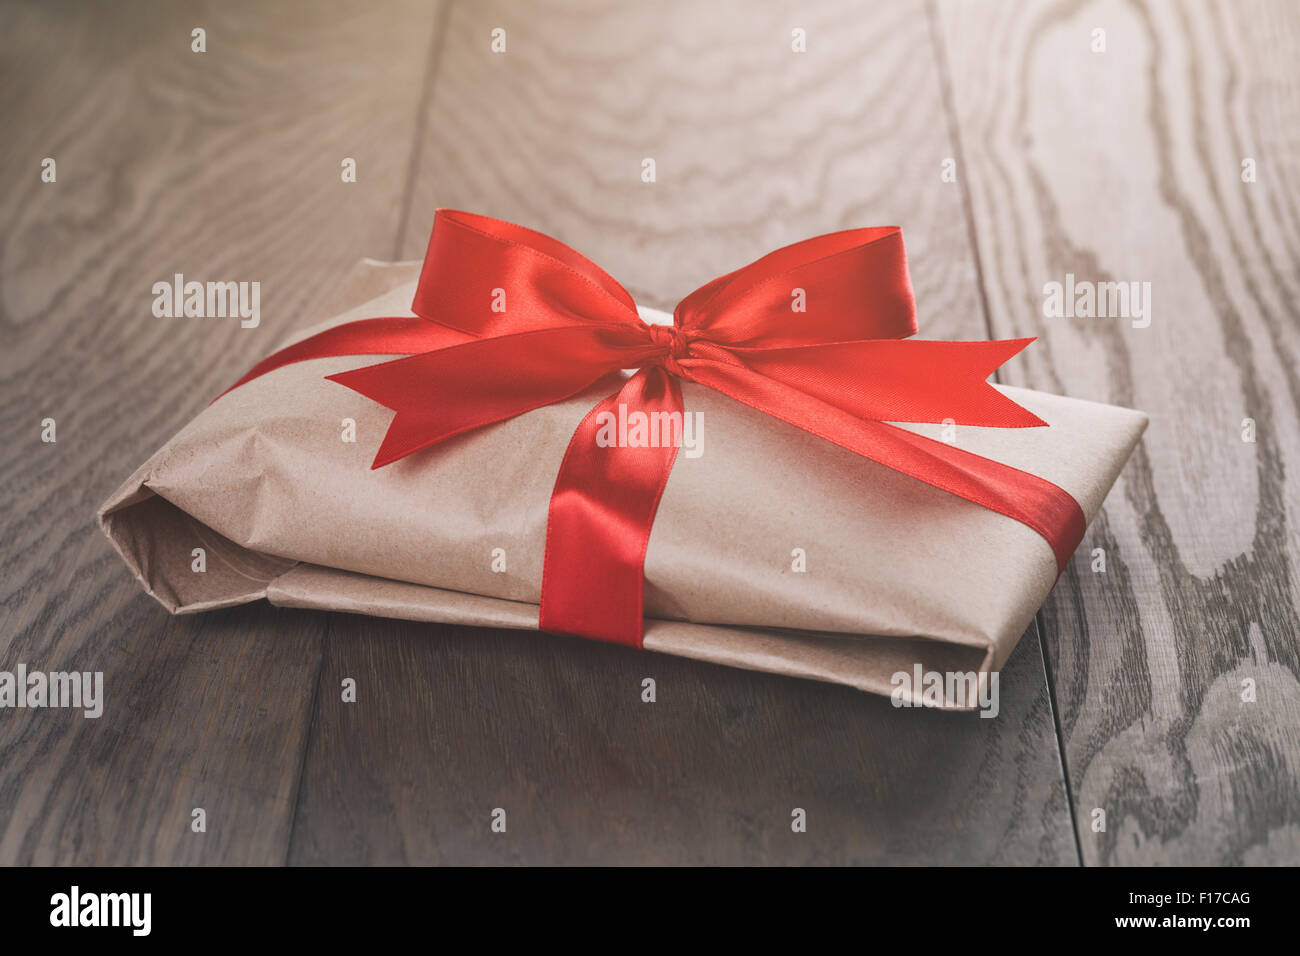 rustic present box with red ribbon on wood table Stock Photo